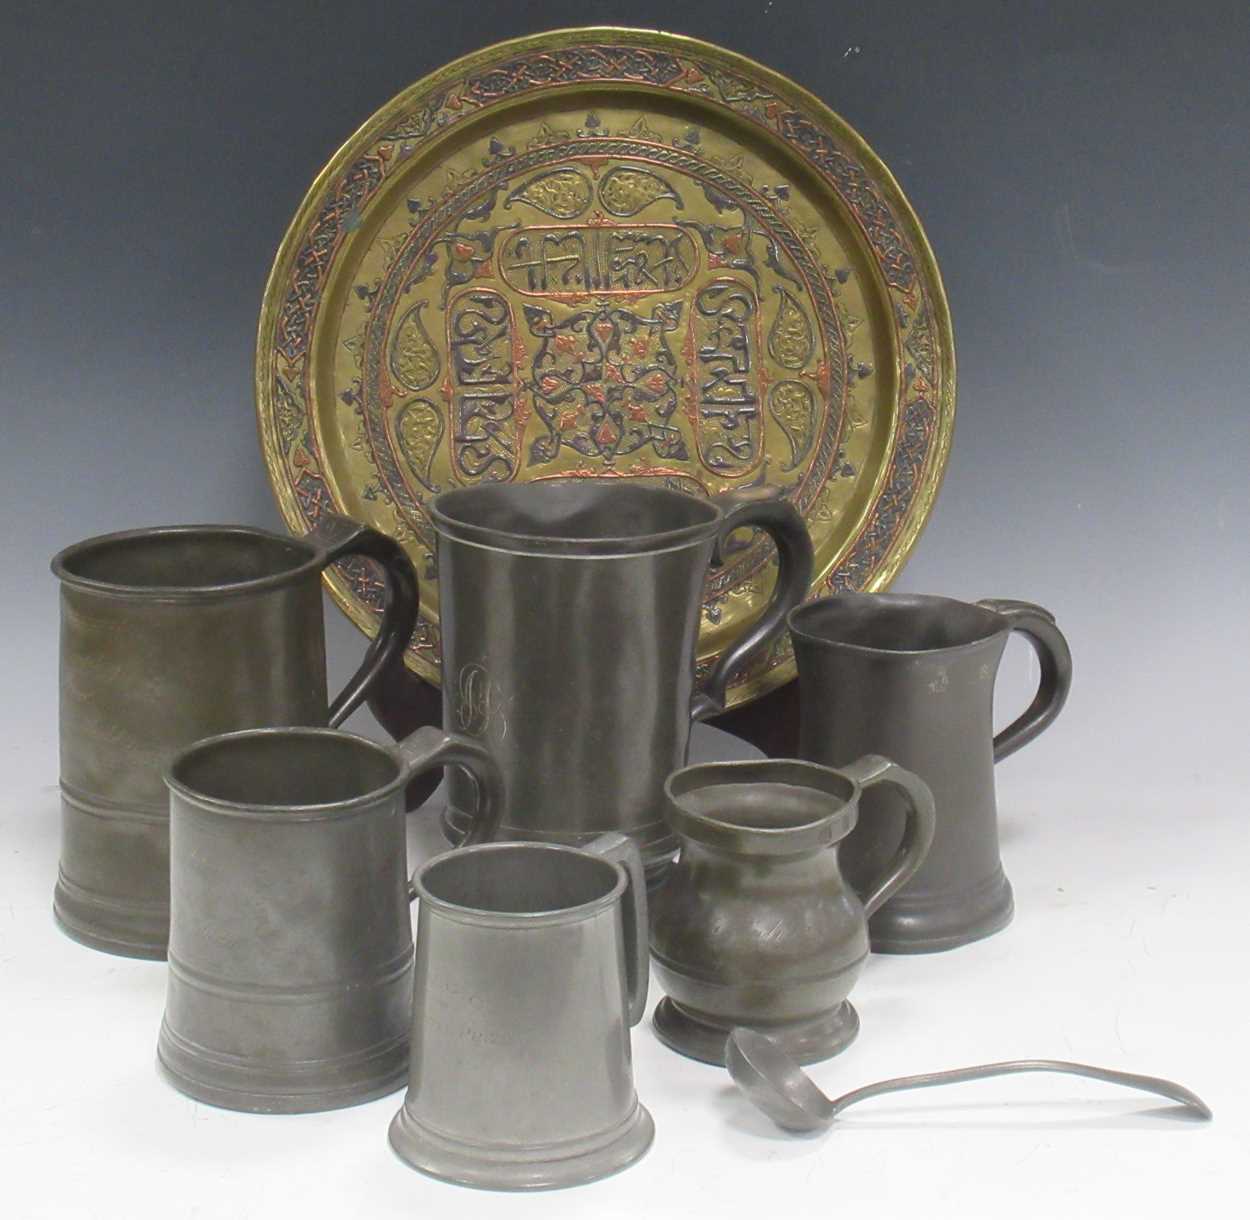 Six antique pewter mugs marked with standard measures, and a 'Damascus 1919' brass dish